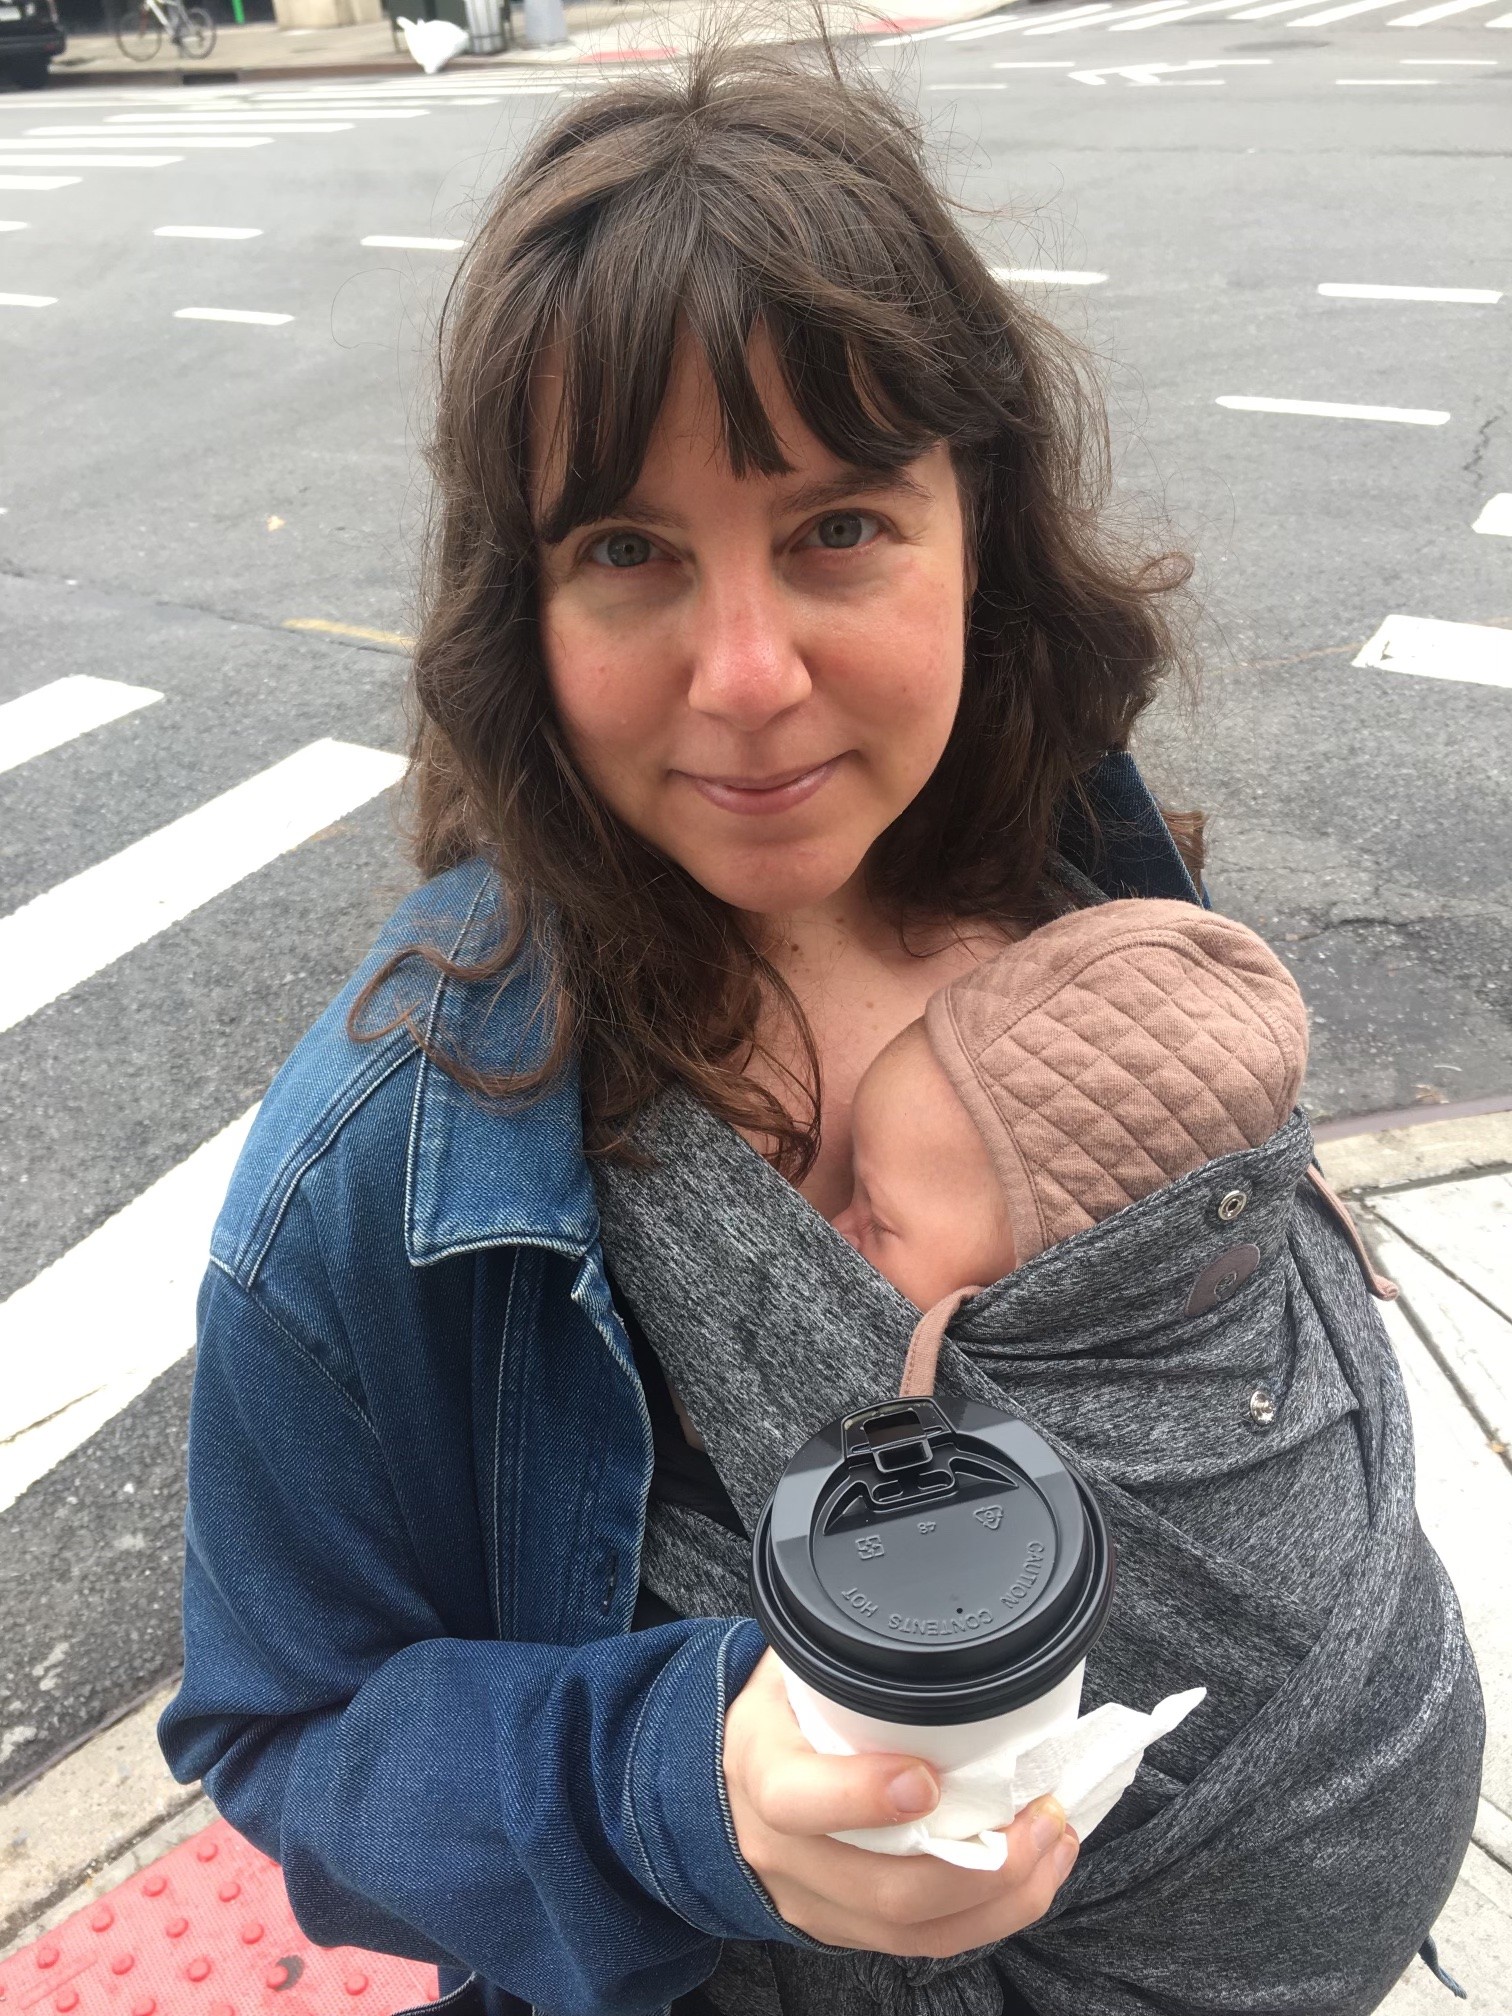 Anna is shown in a portrait-oriented photograph cropped from the waist up. The picture is taken at a slight angle looking down. She is holding a takeaway coffee cup in one hand. There is a baby strapped to her chest in a grey swaddle. Anna is wearing a denim jacket and her dark hair is loose and extends to her shoulders. The baby is wearing a quilted cap. The photo is taken at a street corner.